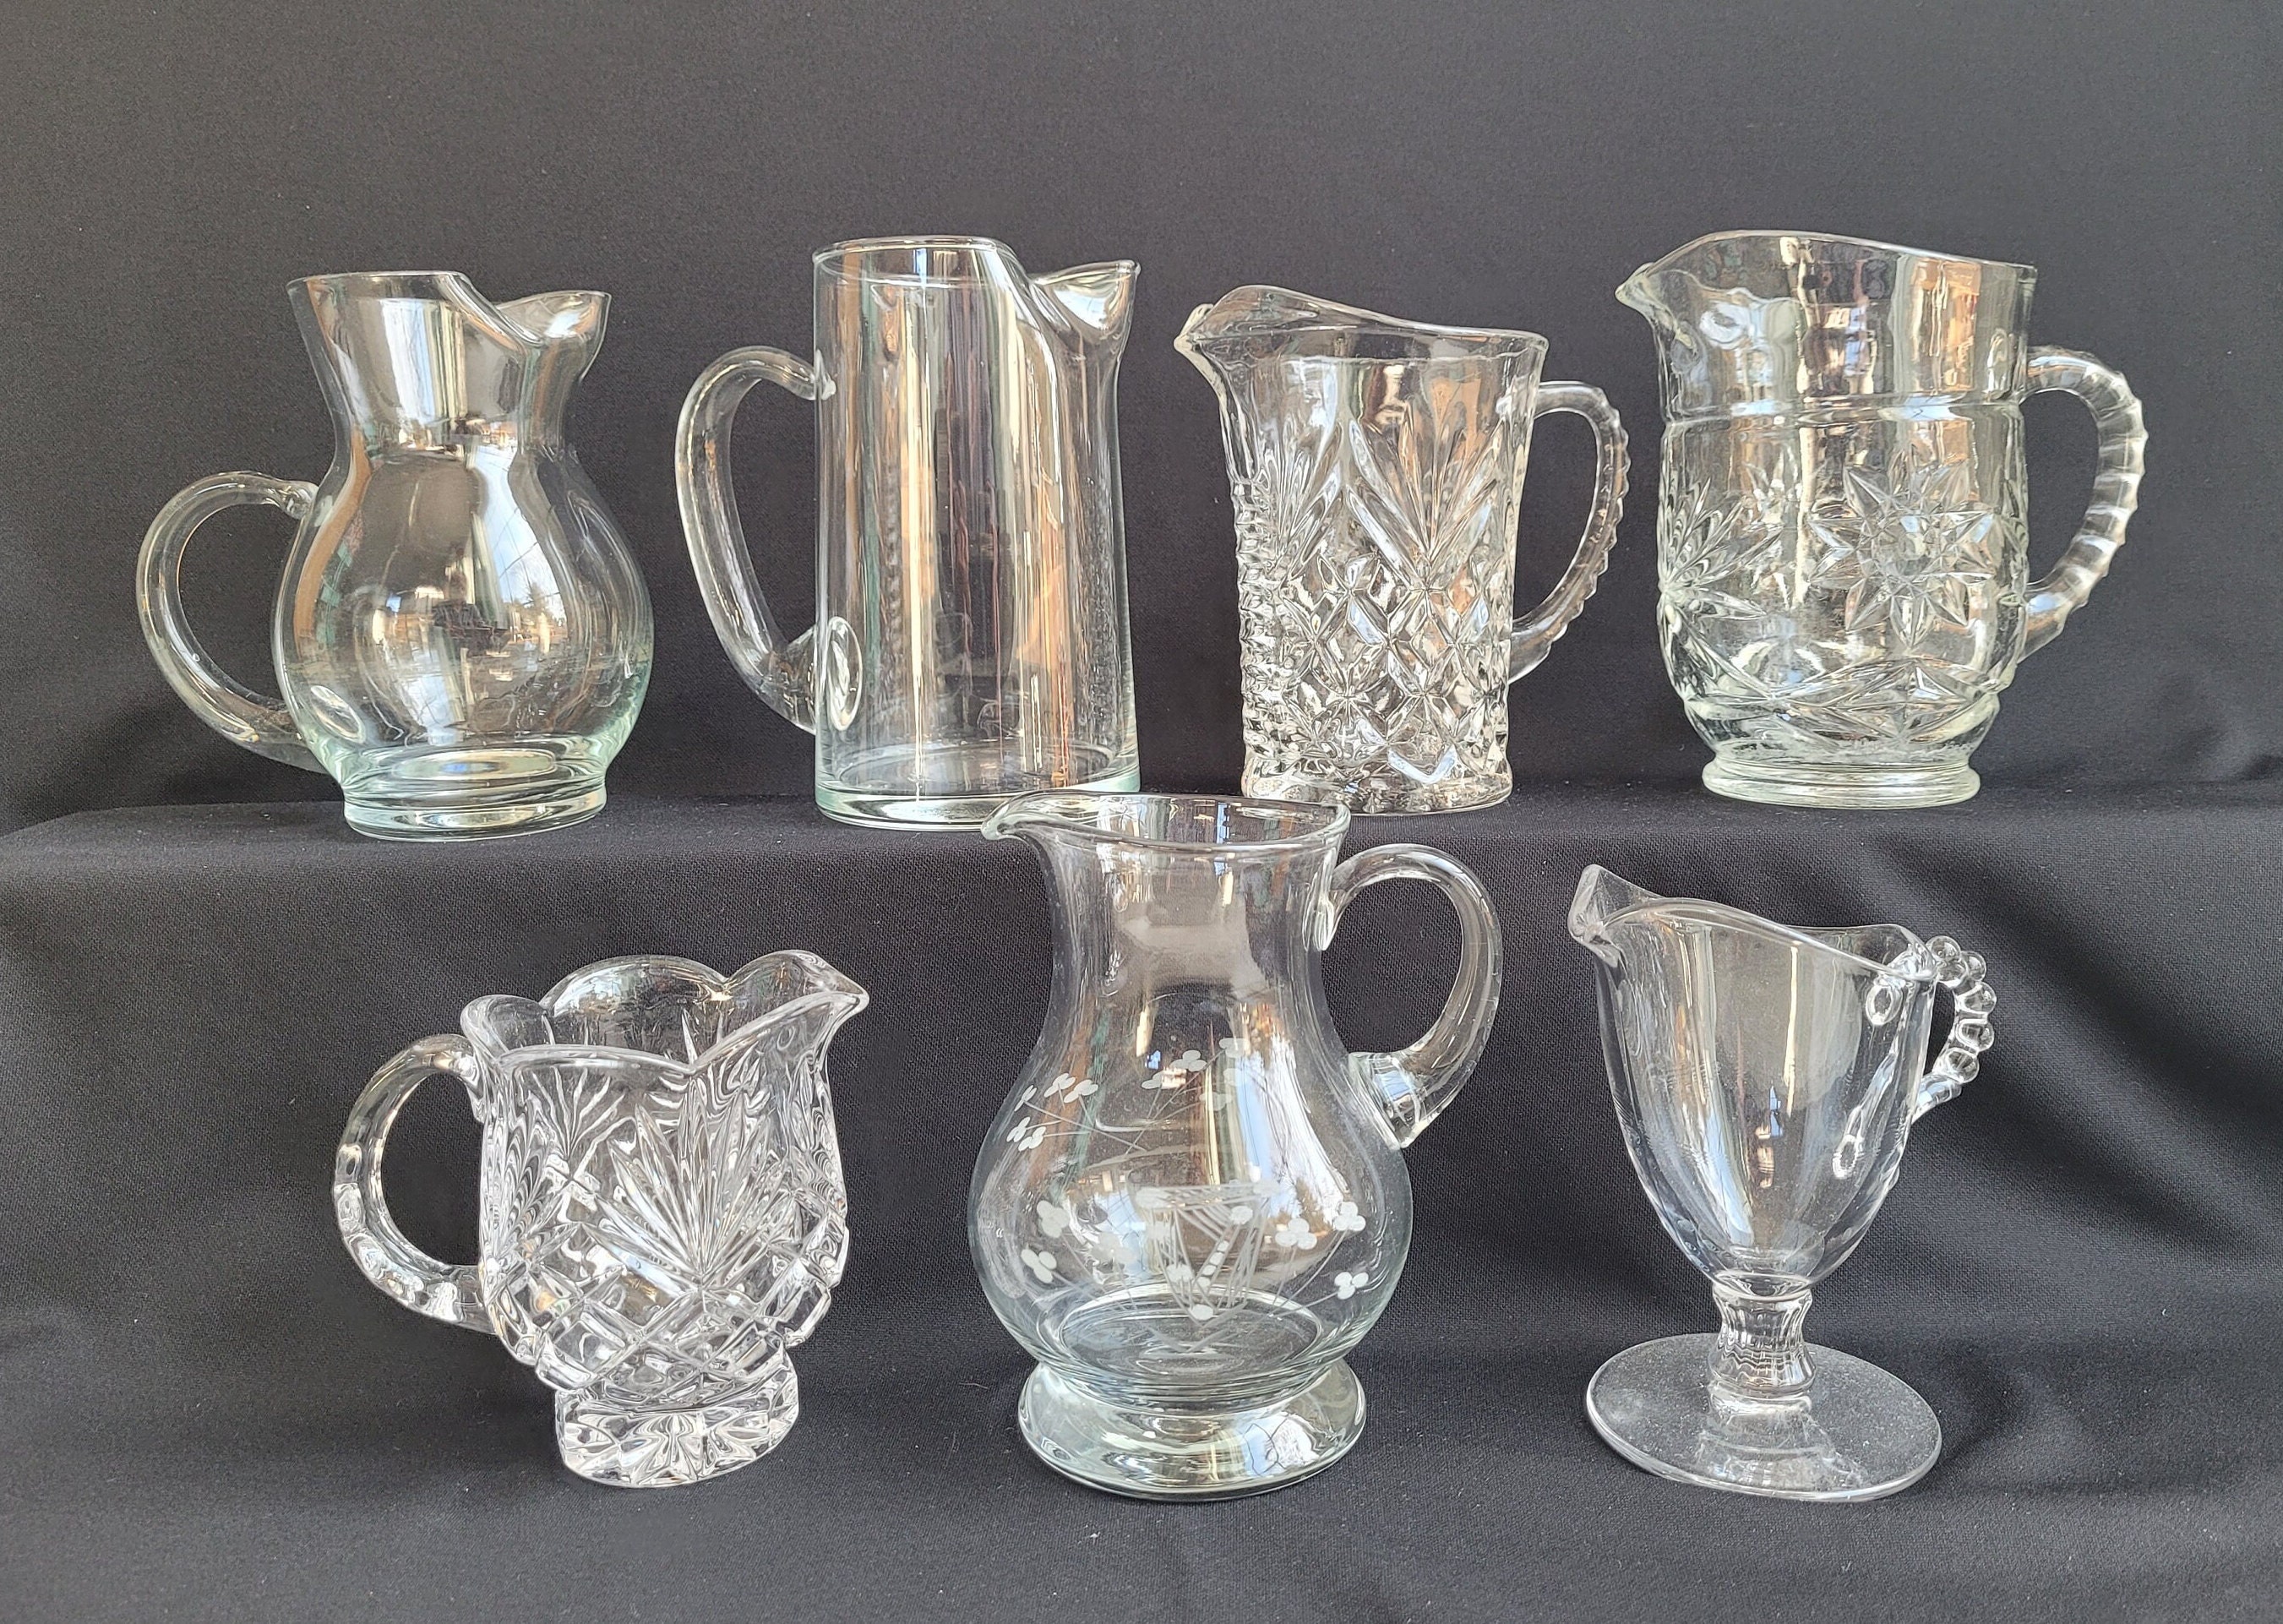 Vintage Small Glass Pitcher Auction